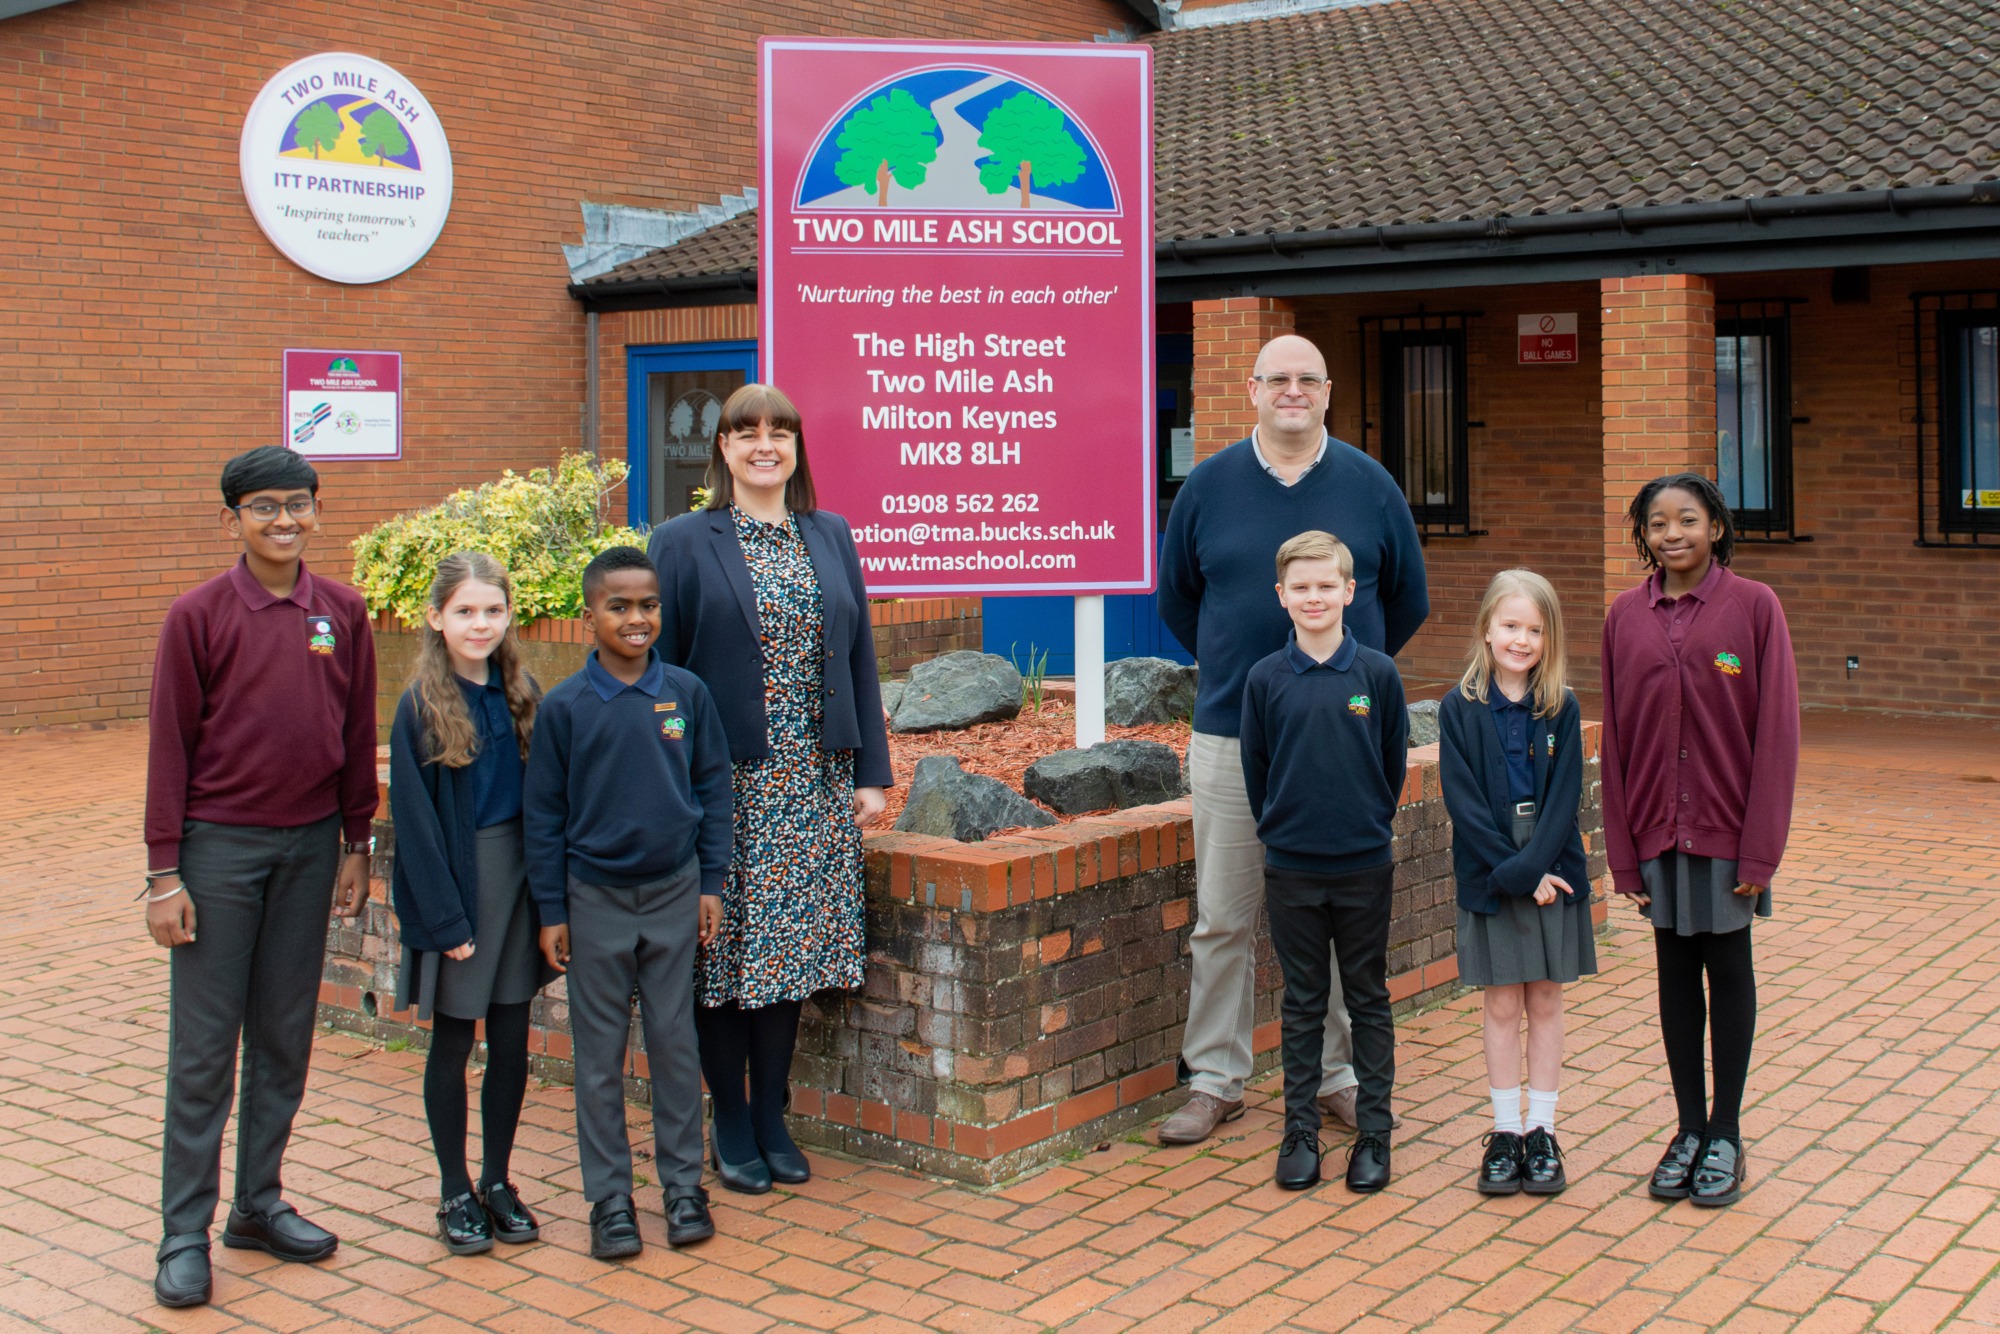 “Pupils’ learn that you can be who you want to be” at Ofsted ‘Outstanding’ Two Mile Ash (TMA) School | Northamptonshire Chamber of Commerce